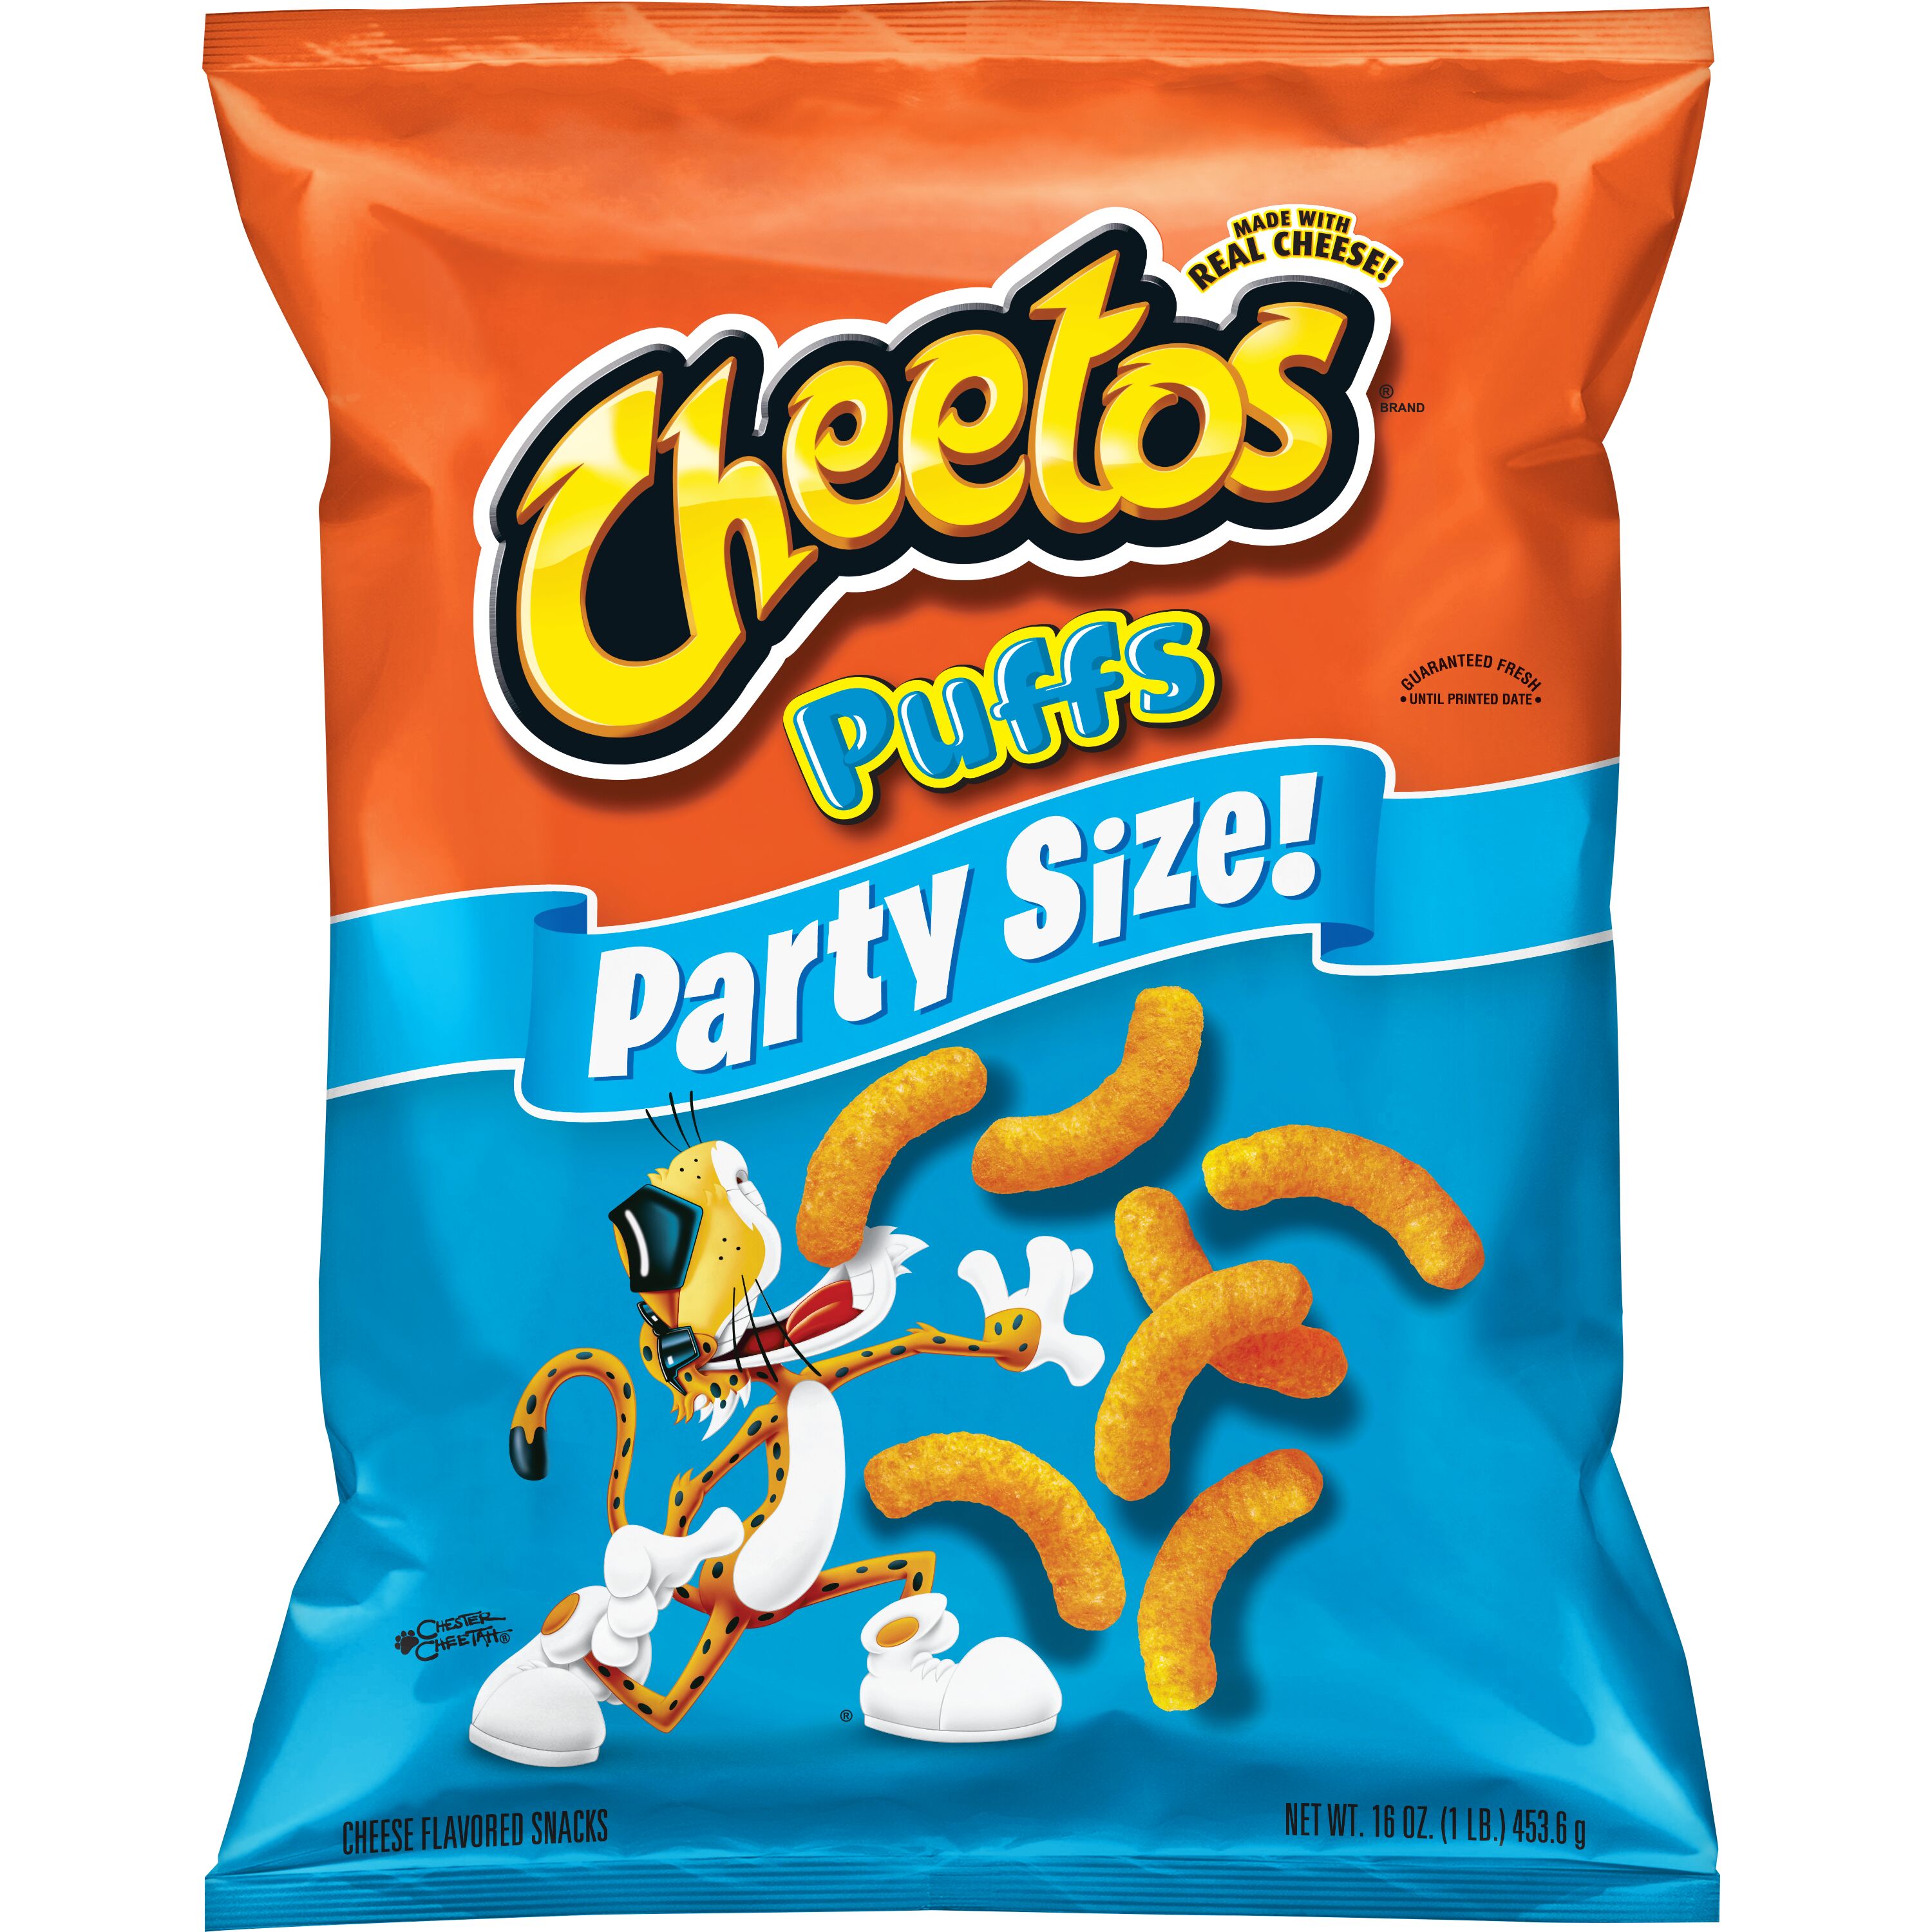 Cheetos Cheese Puffs Flavored Snack Chips Party Size, 16 oz - image 1 of 10